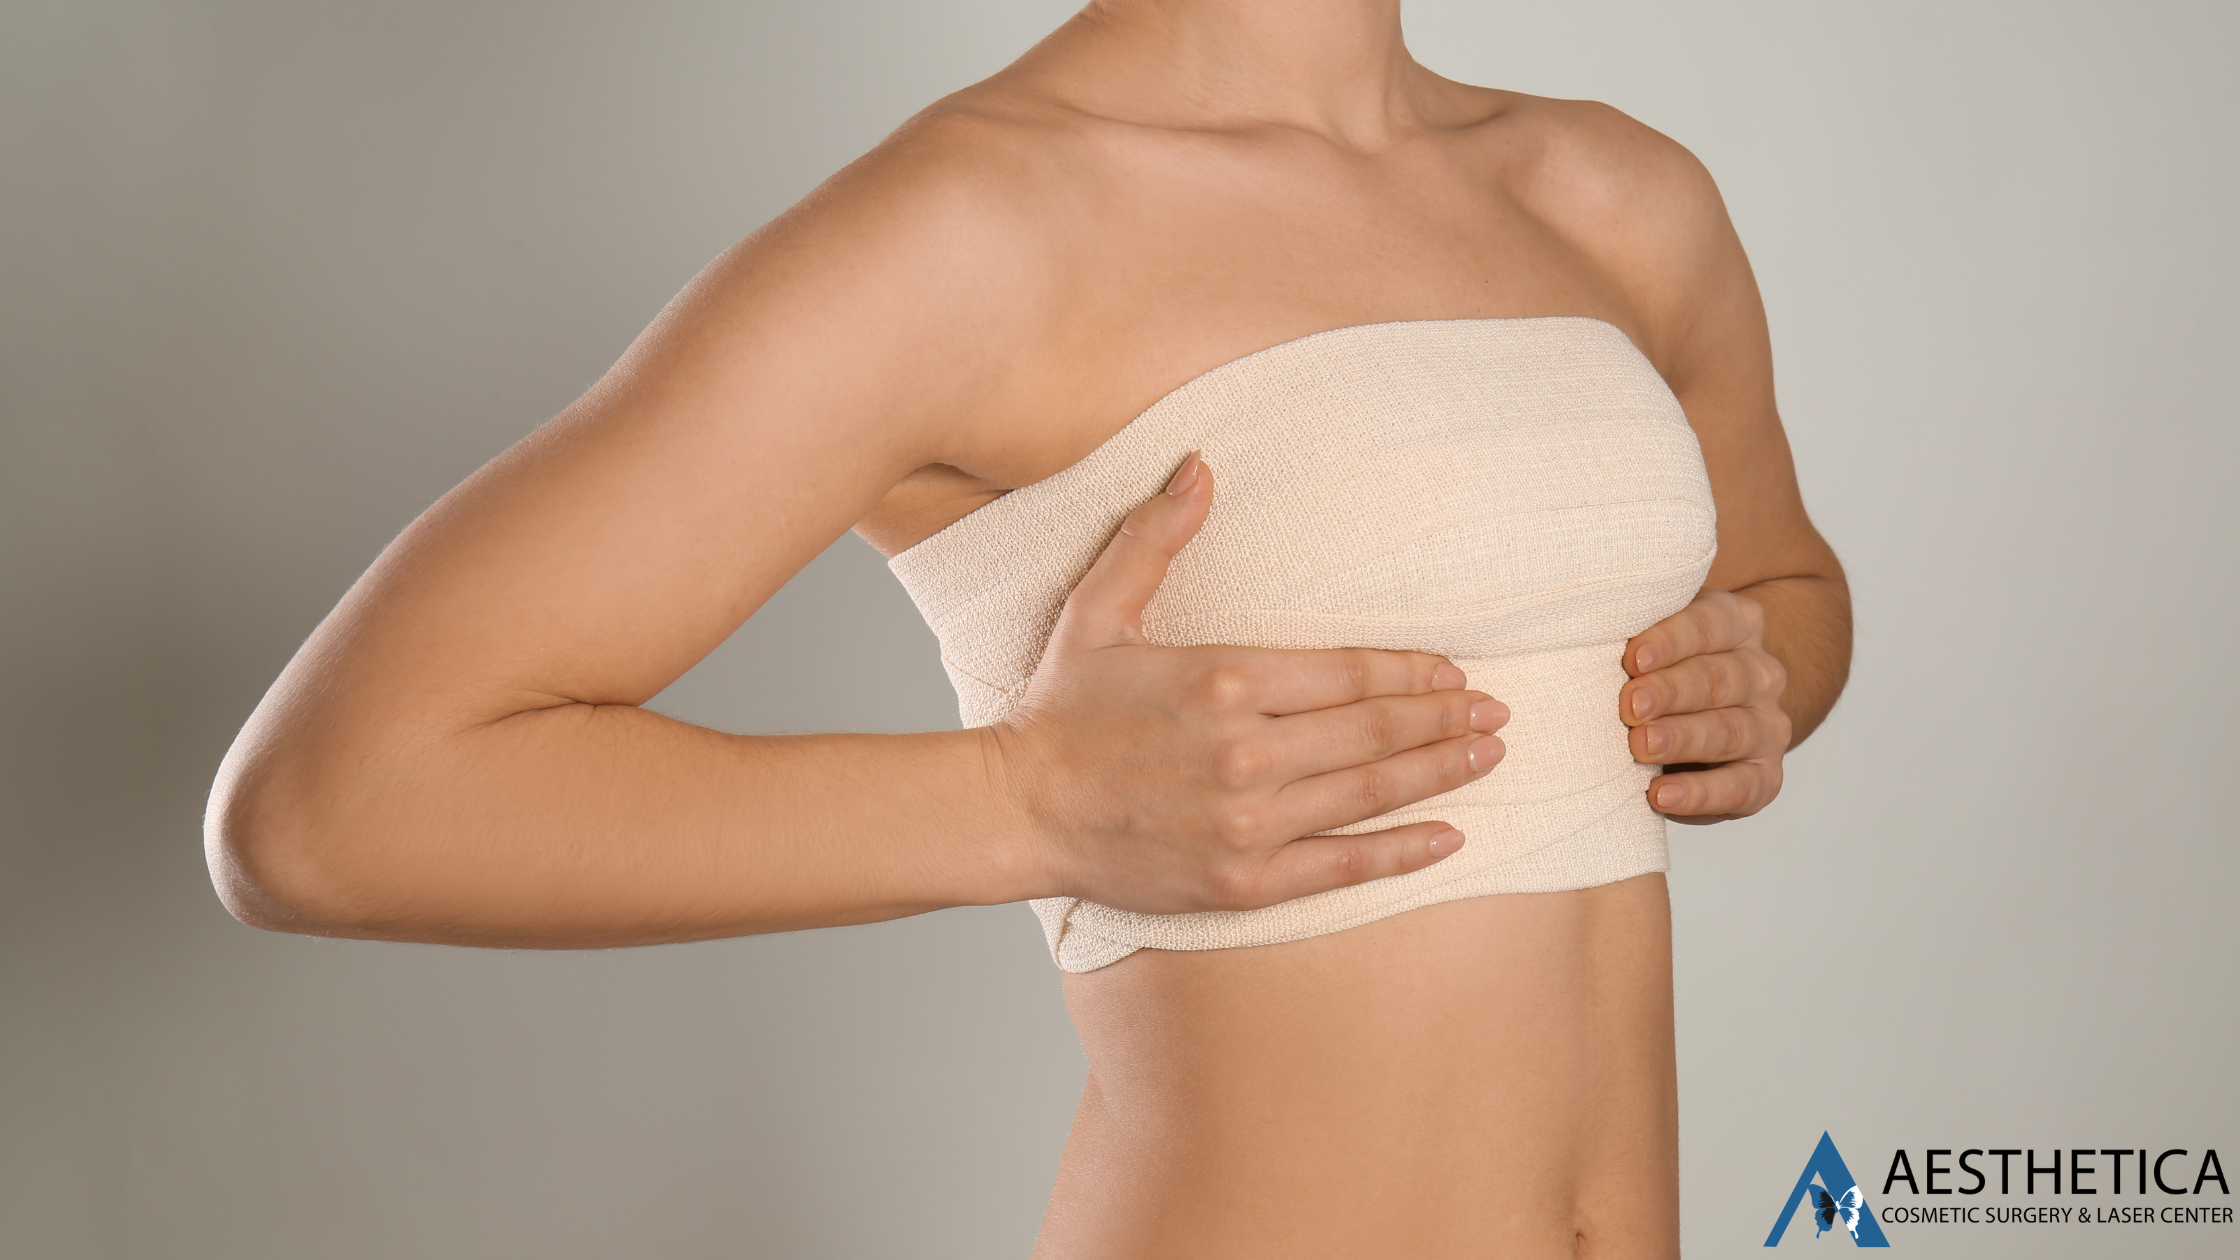 Breast surgery recovery